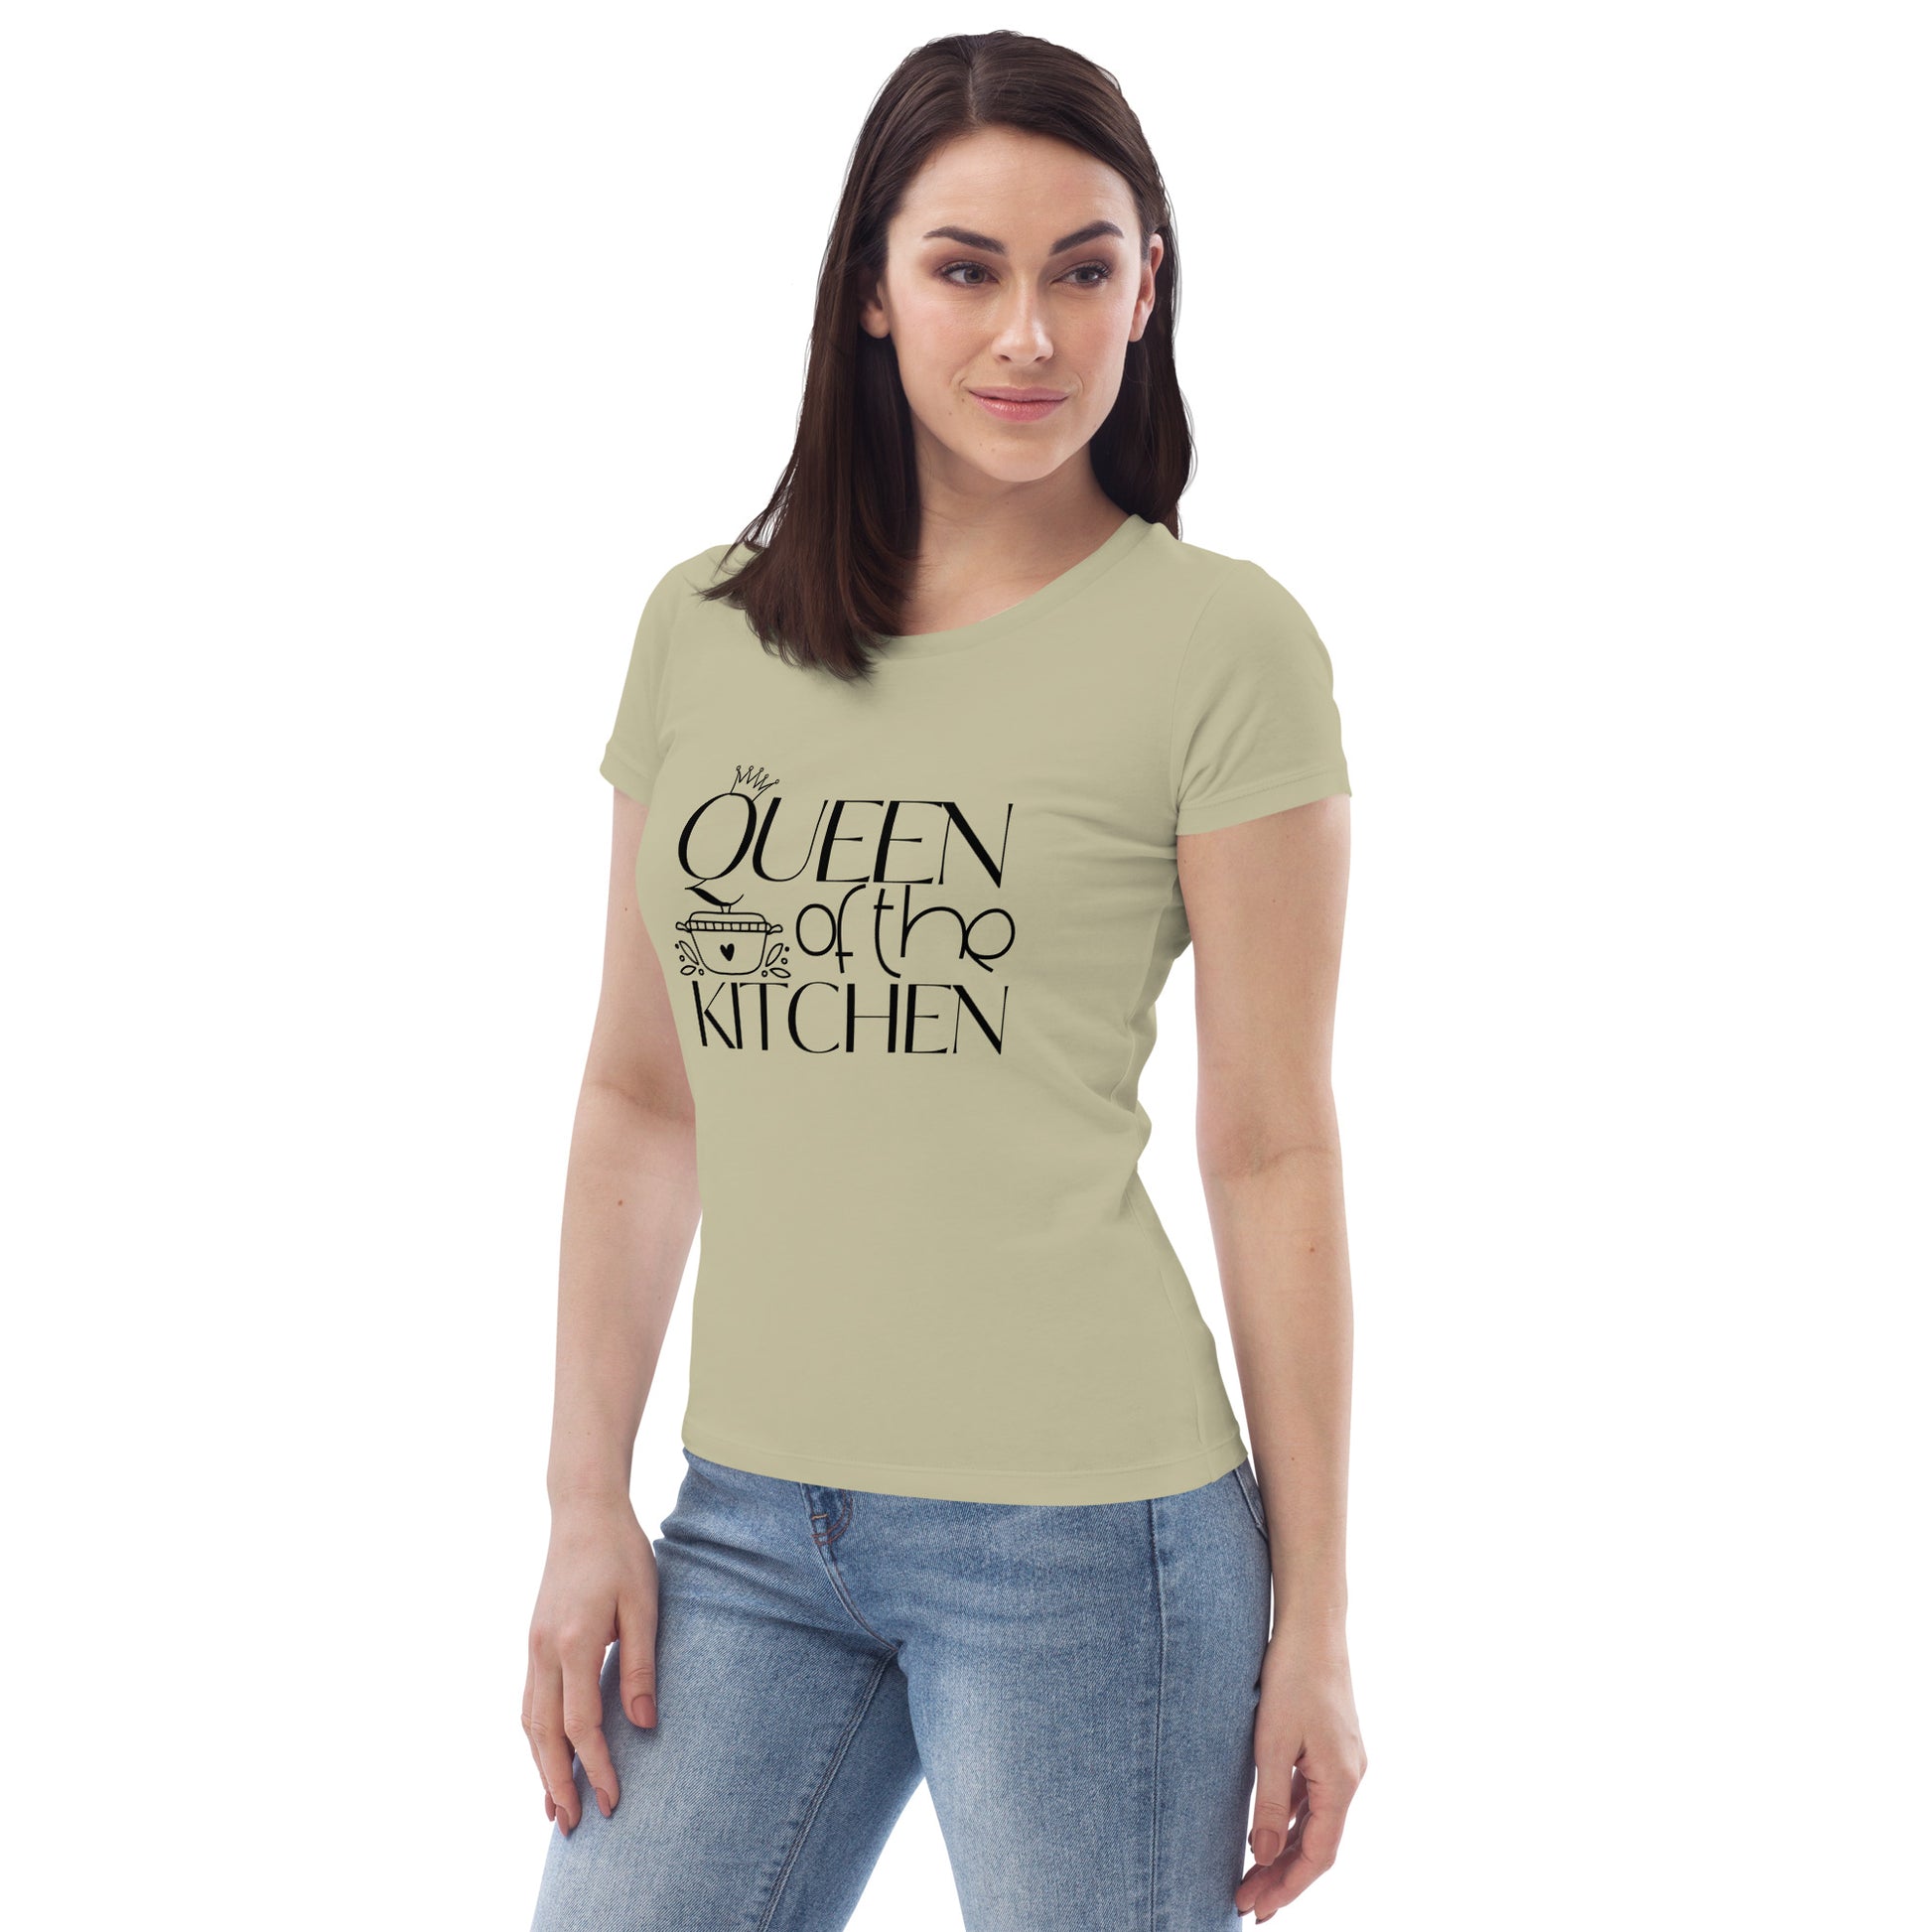 Queen of the kitchen - custom made 100% organic cotton T-Shirt. Perfect for the hobby chef. Color: sage